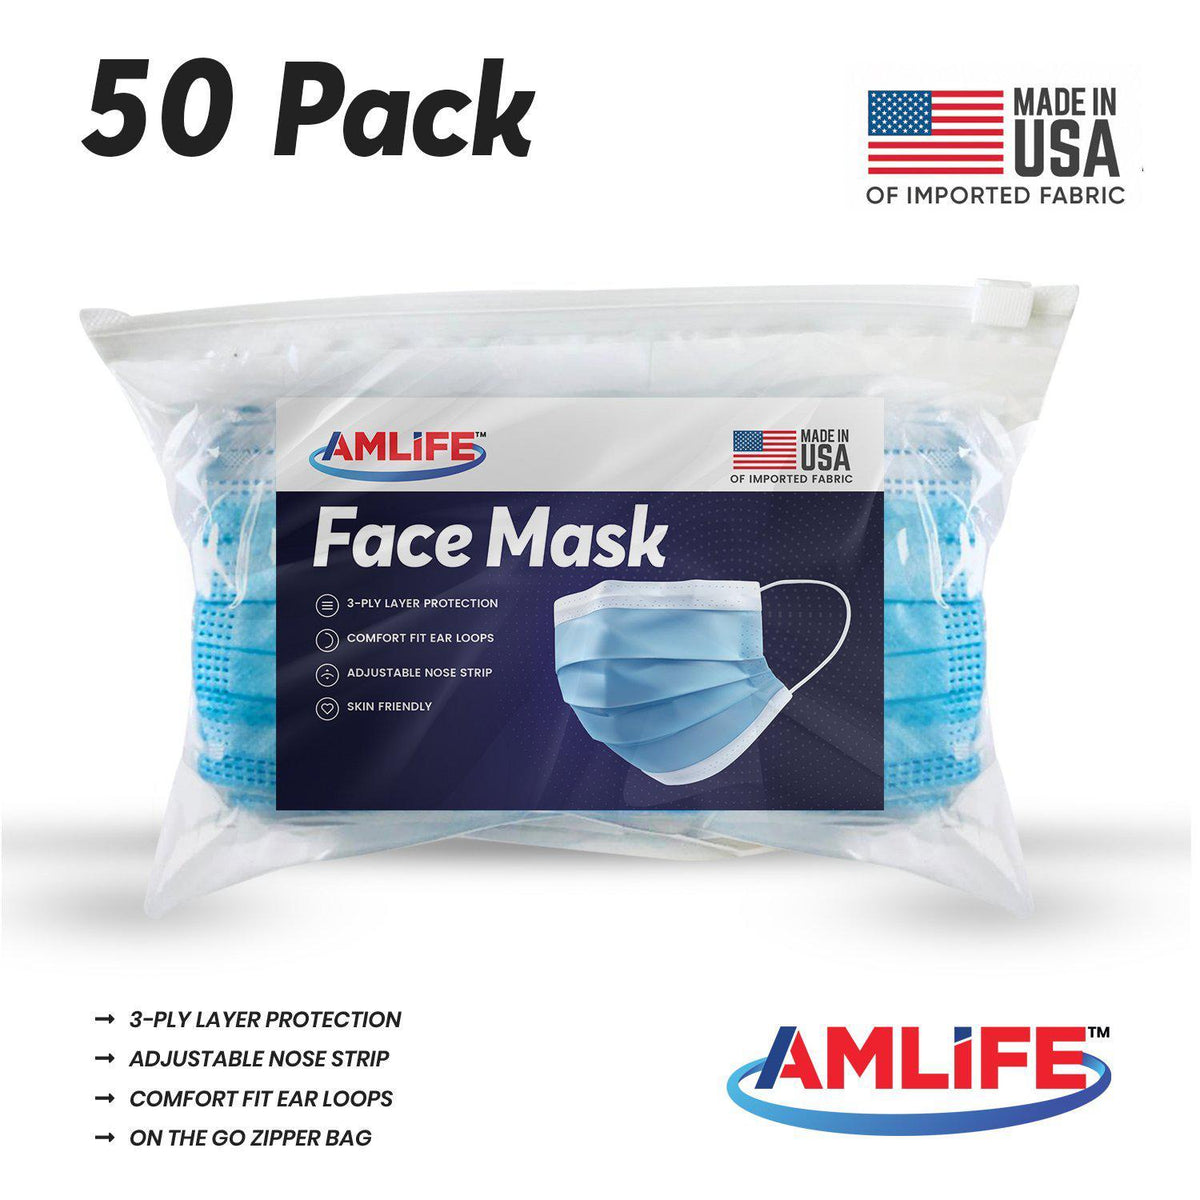 Amlife 50 Pack Face Mask Blue Made in USA Imported Fabric